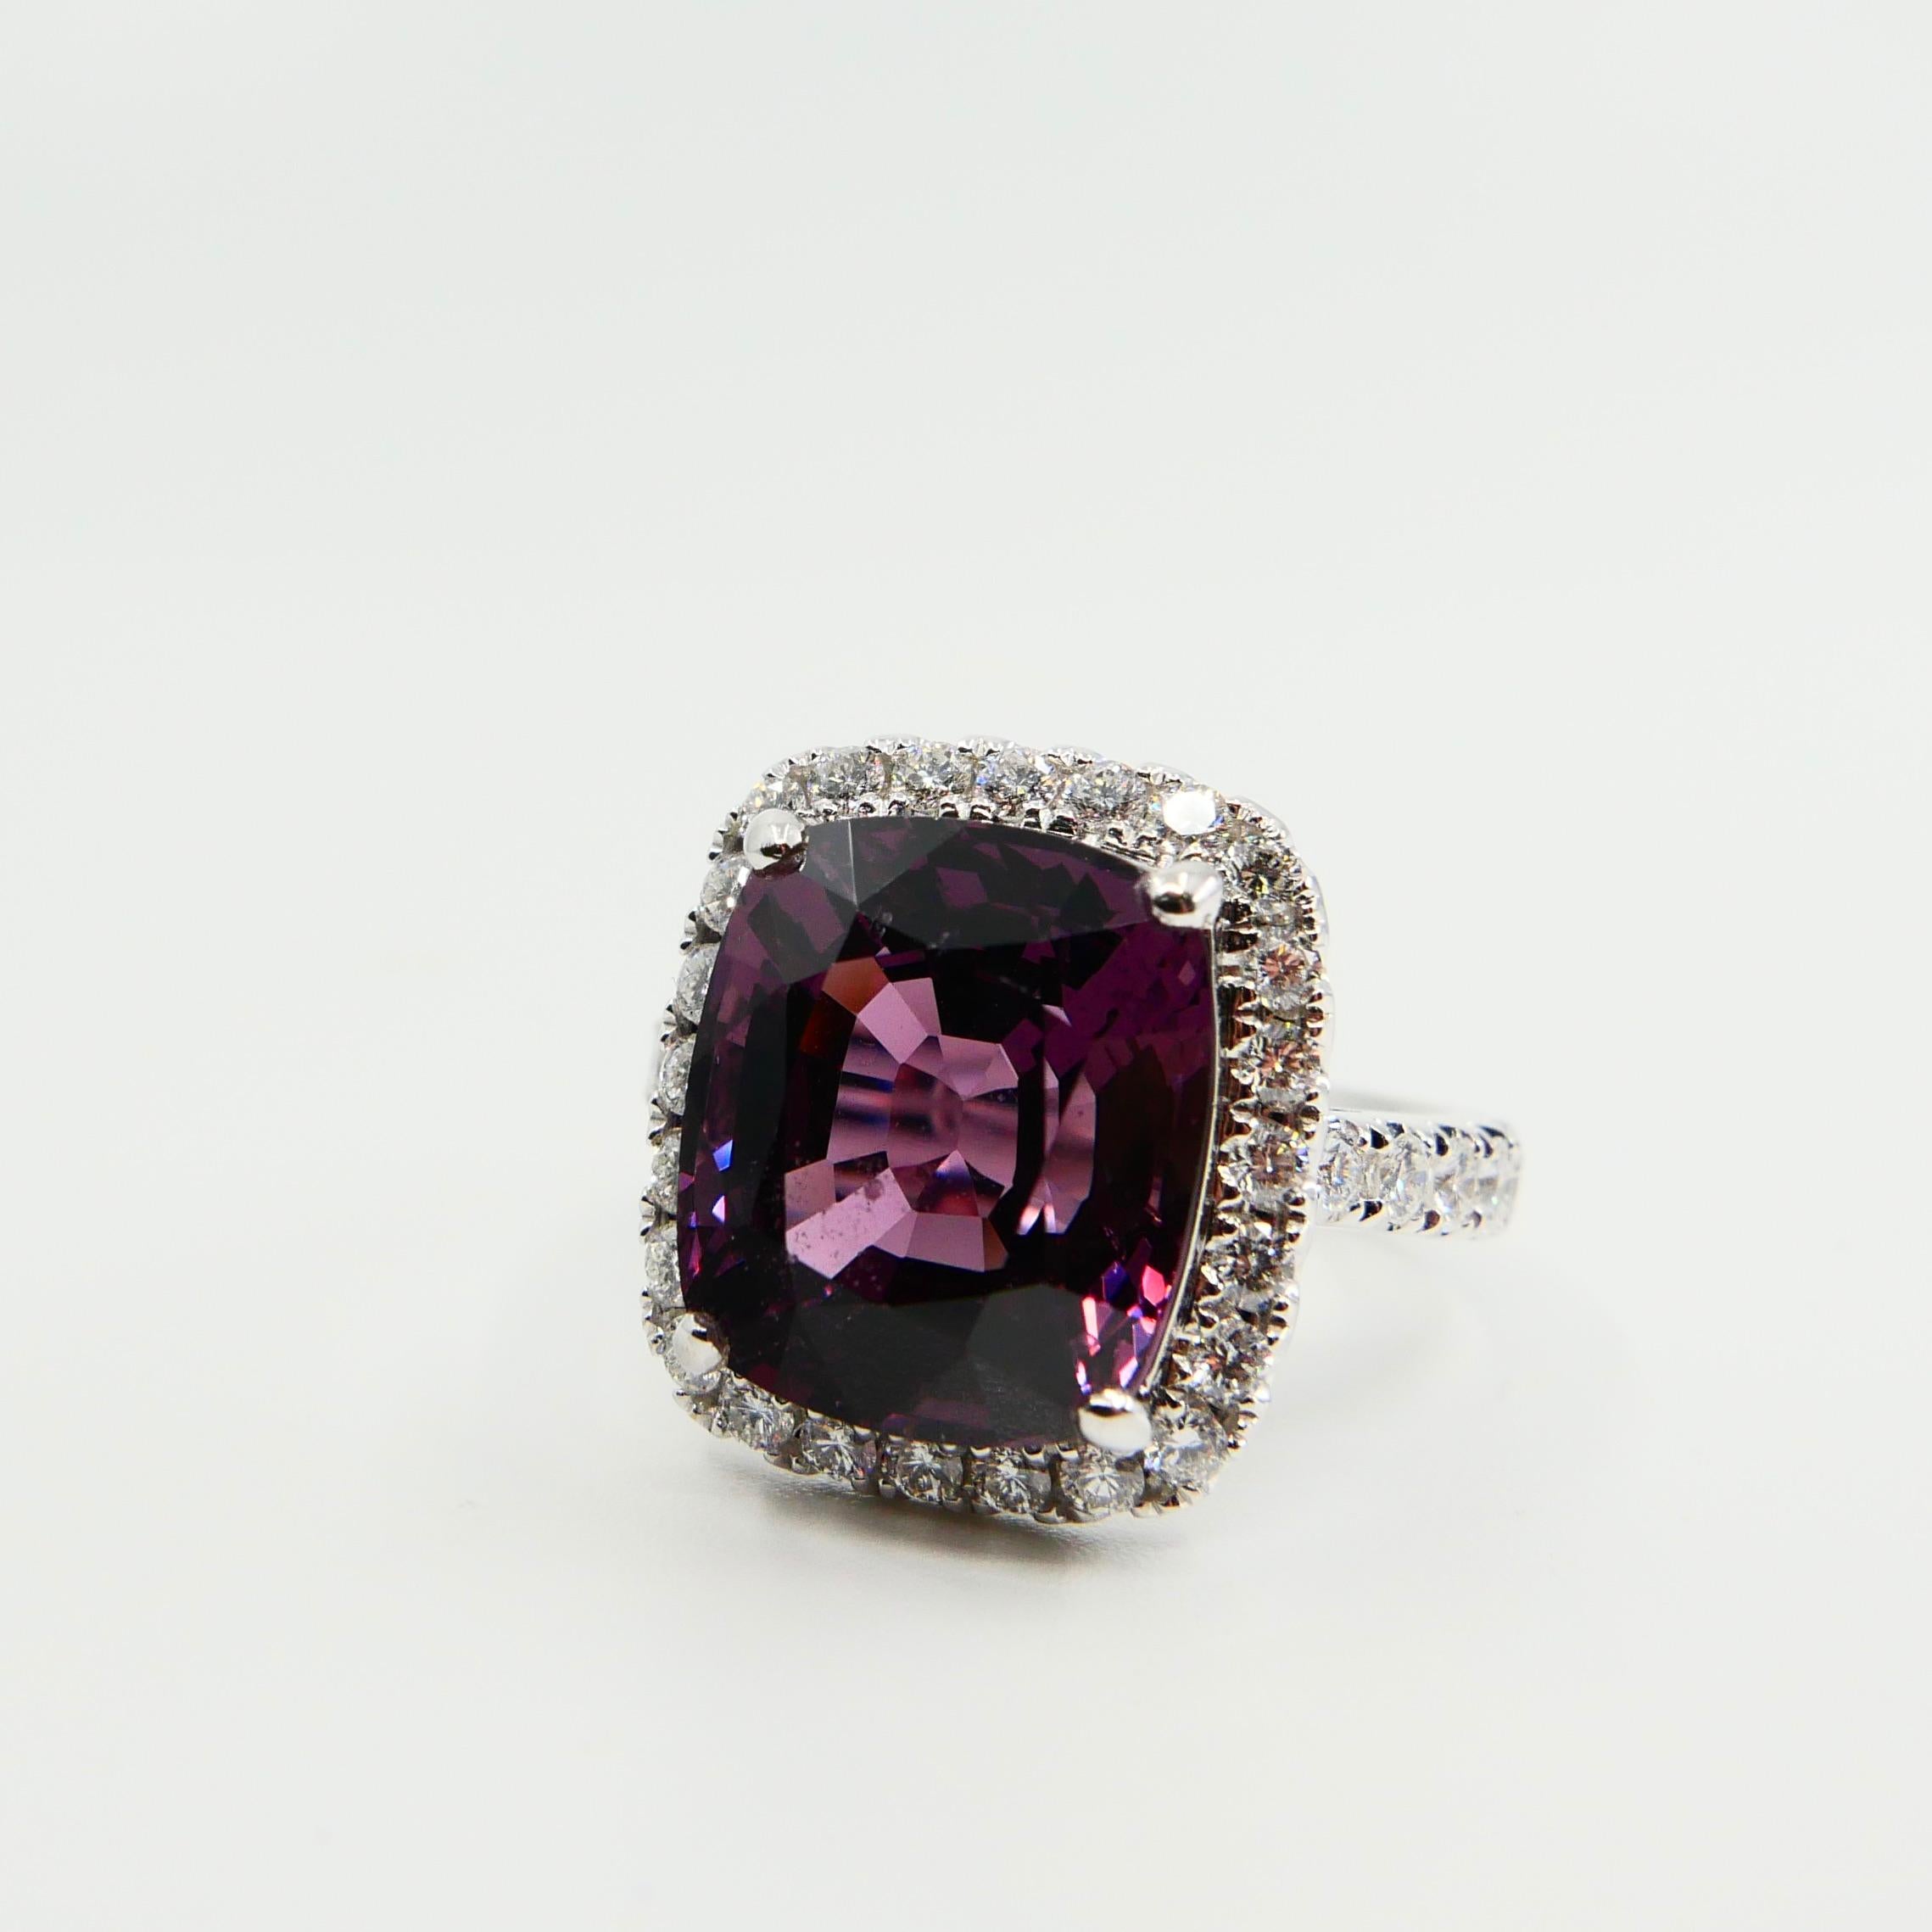 Certified Natural 9.18 Carat Vivid Purple No Heat Spinel & Diamond Cocktail Ring For Sale 3